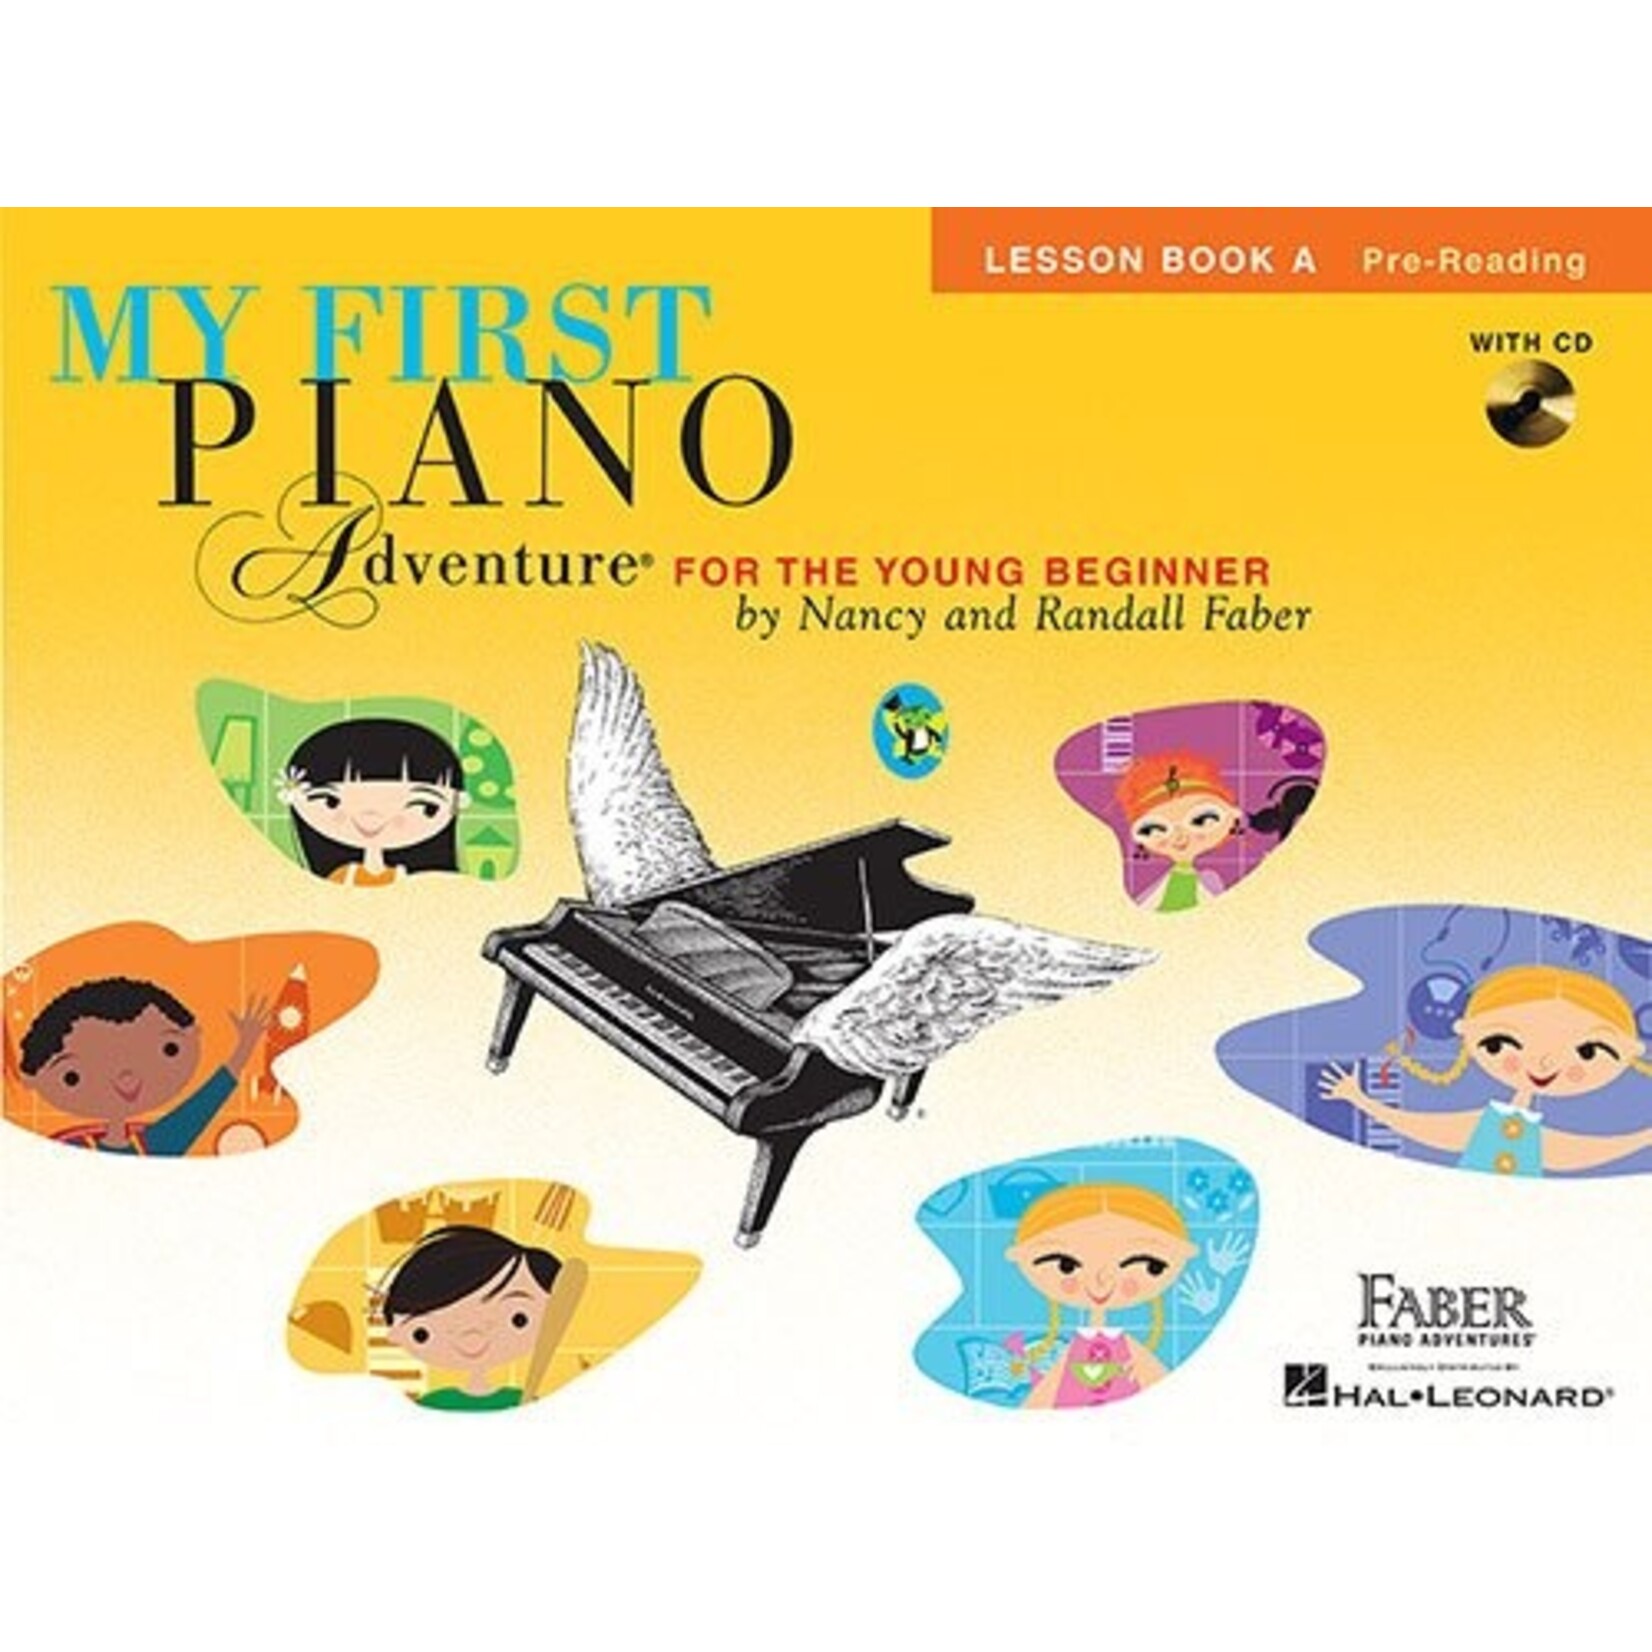 My First Piano Adventure Lesson Book A with CD - Faber